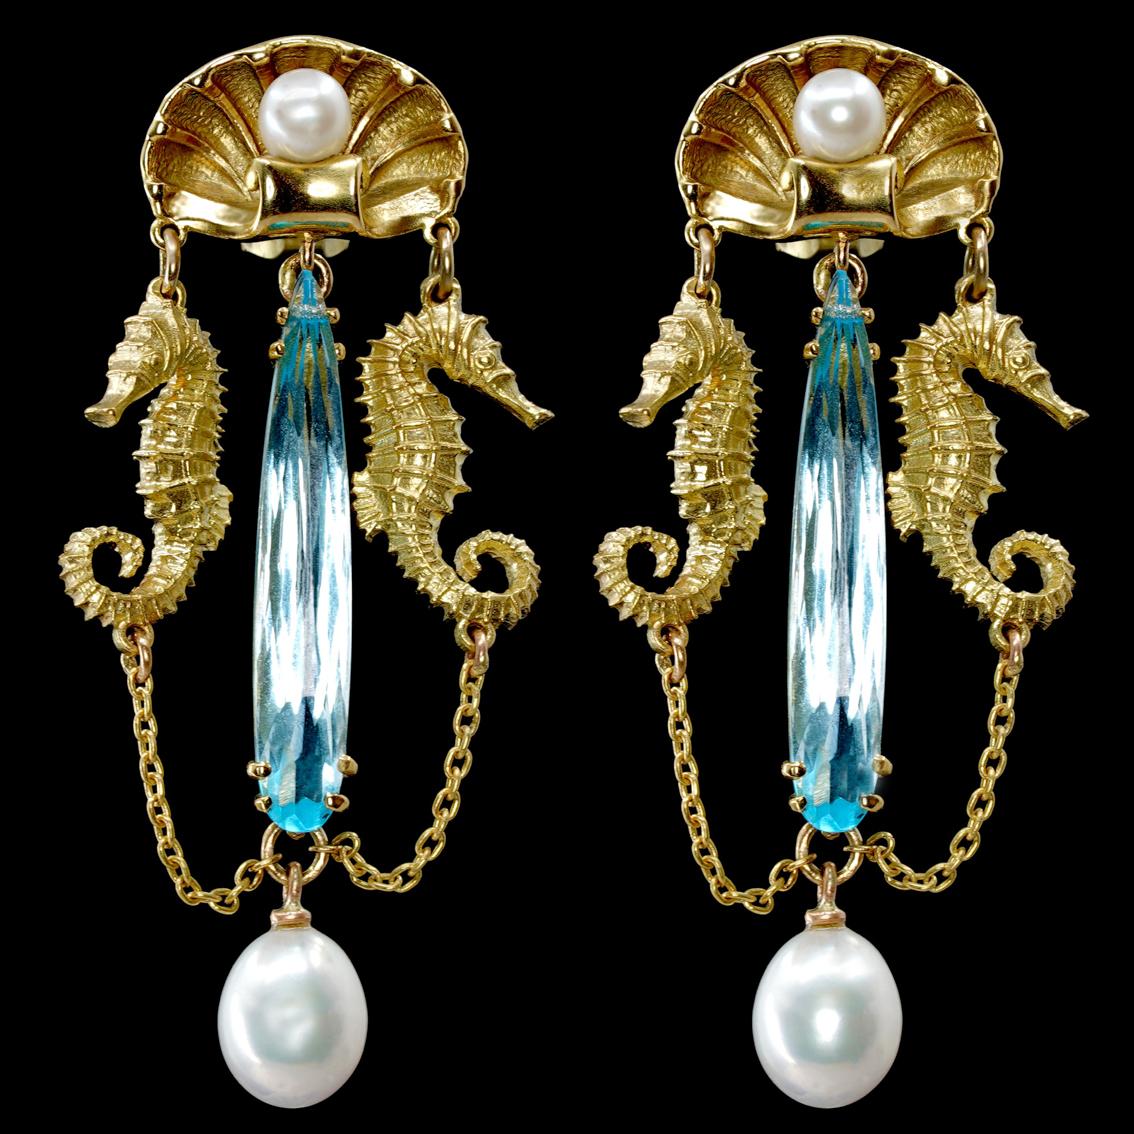 Fit for a goddess, the Amphitrite's Tears Earrings are truly a sight to behold.

Beautifully handcrafted in 18kt yellow gold, each earring features a stunning 6.3ct teardrop cut 5mm x 30mm Swiss blue Topaz and two creamy freshwater pearls. 